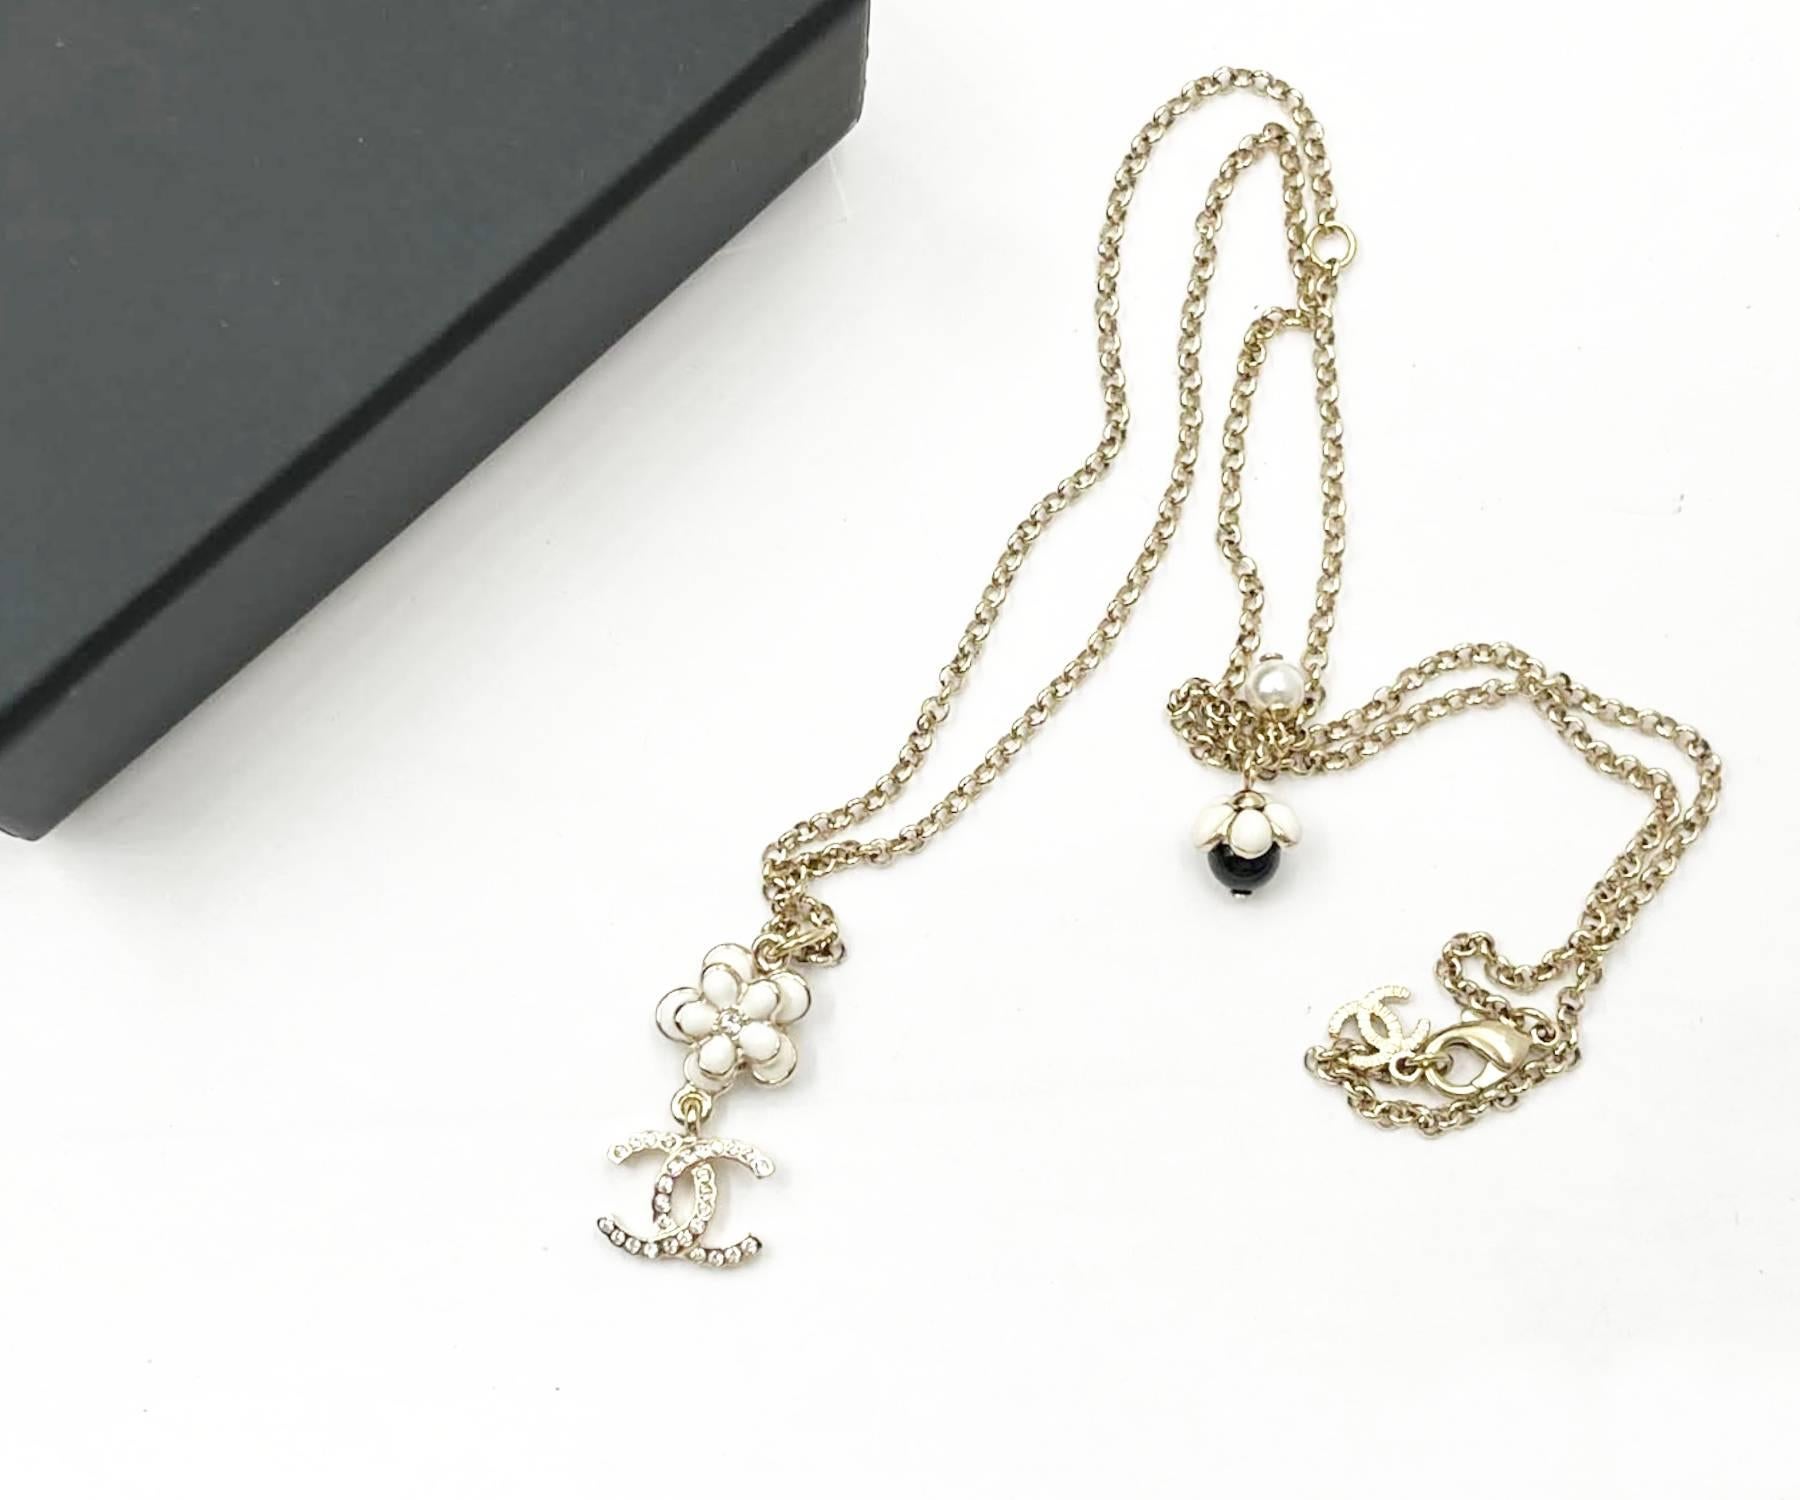 Chanel White Flower Gold CC Crystal Black Flower Necklace

*Marked 21
*Made in France
*Comes with the original box and pouch

-It is approximately 16″ to 23″.
-The pendant is approximately 1″ x 0.6″.
-Very pretty and classic

AB2261-00465